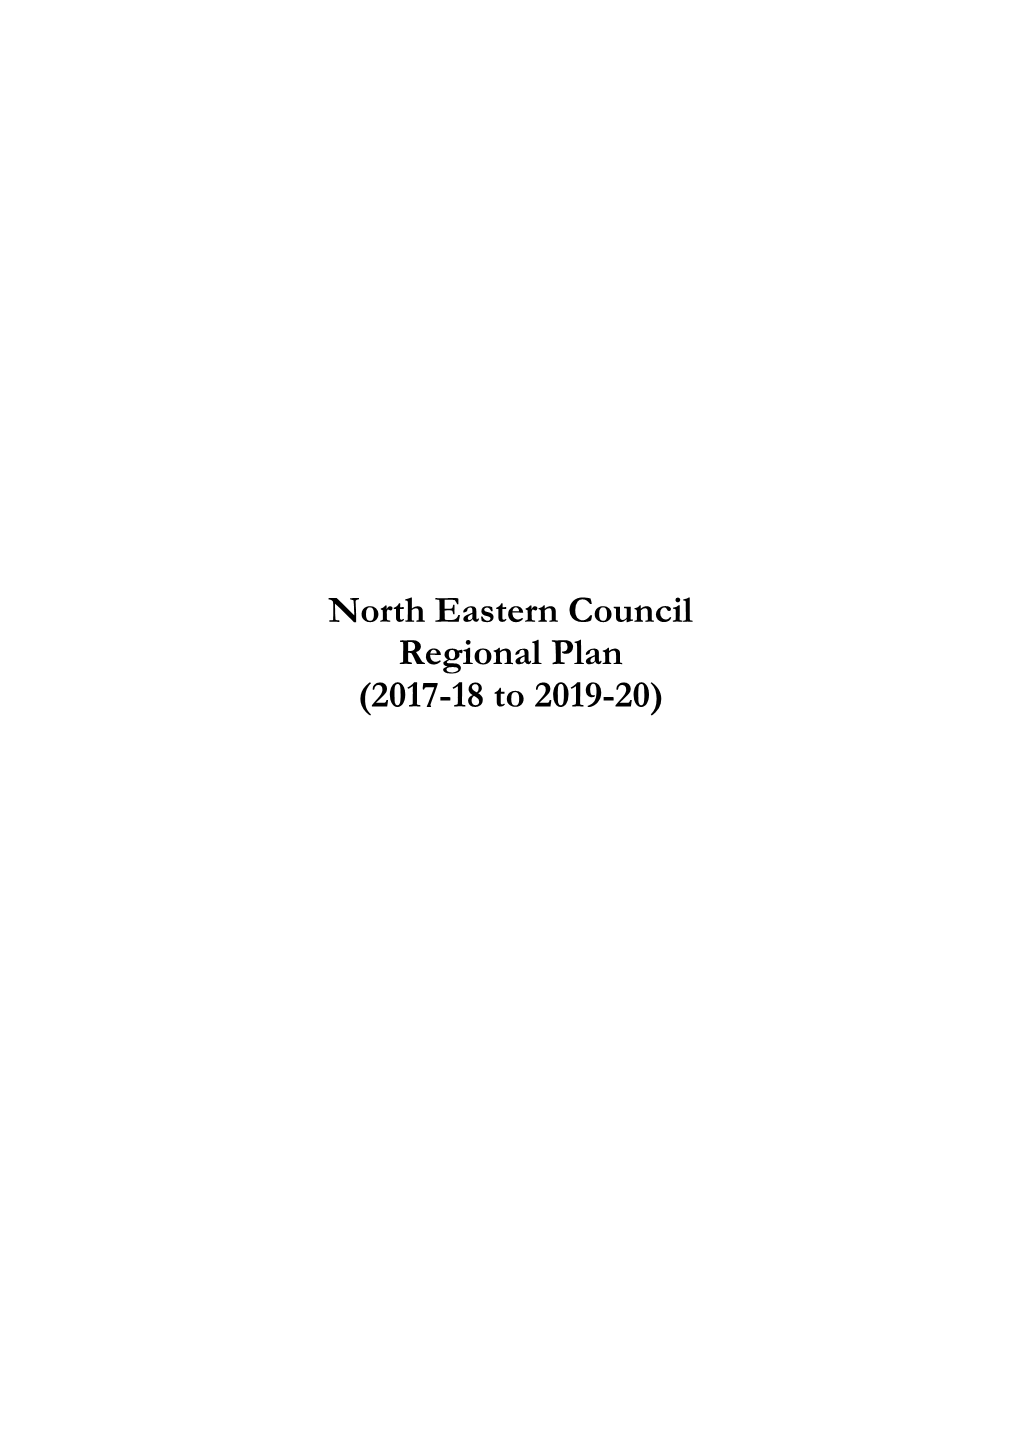 North Eastern Council Regional Plan (2017-18 to 2019-20)